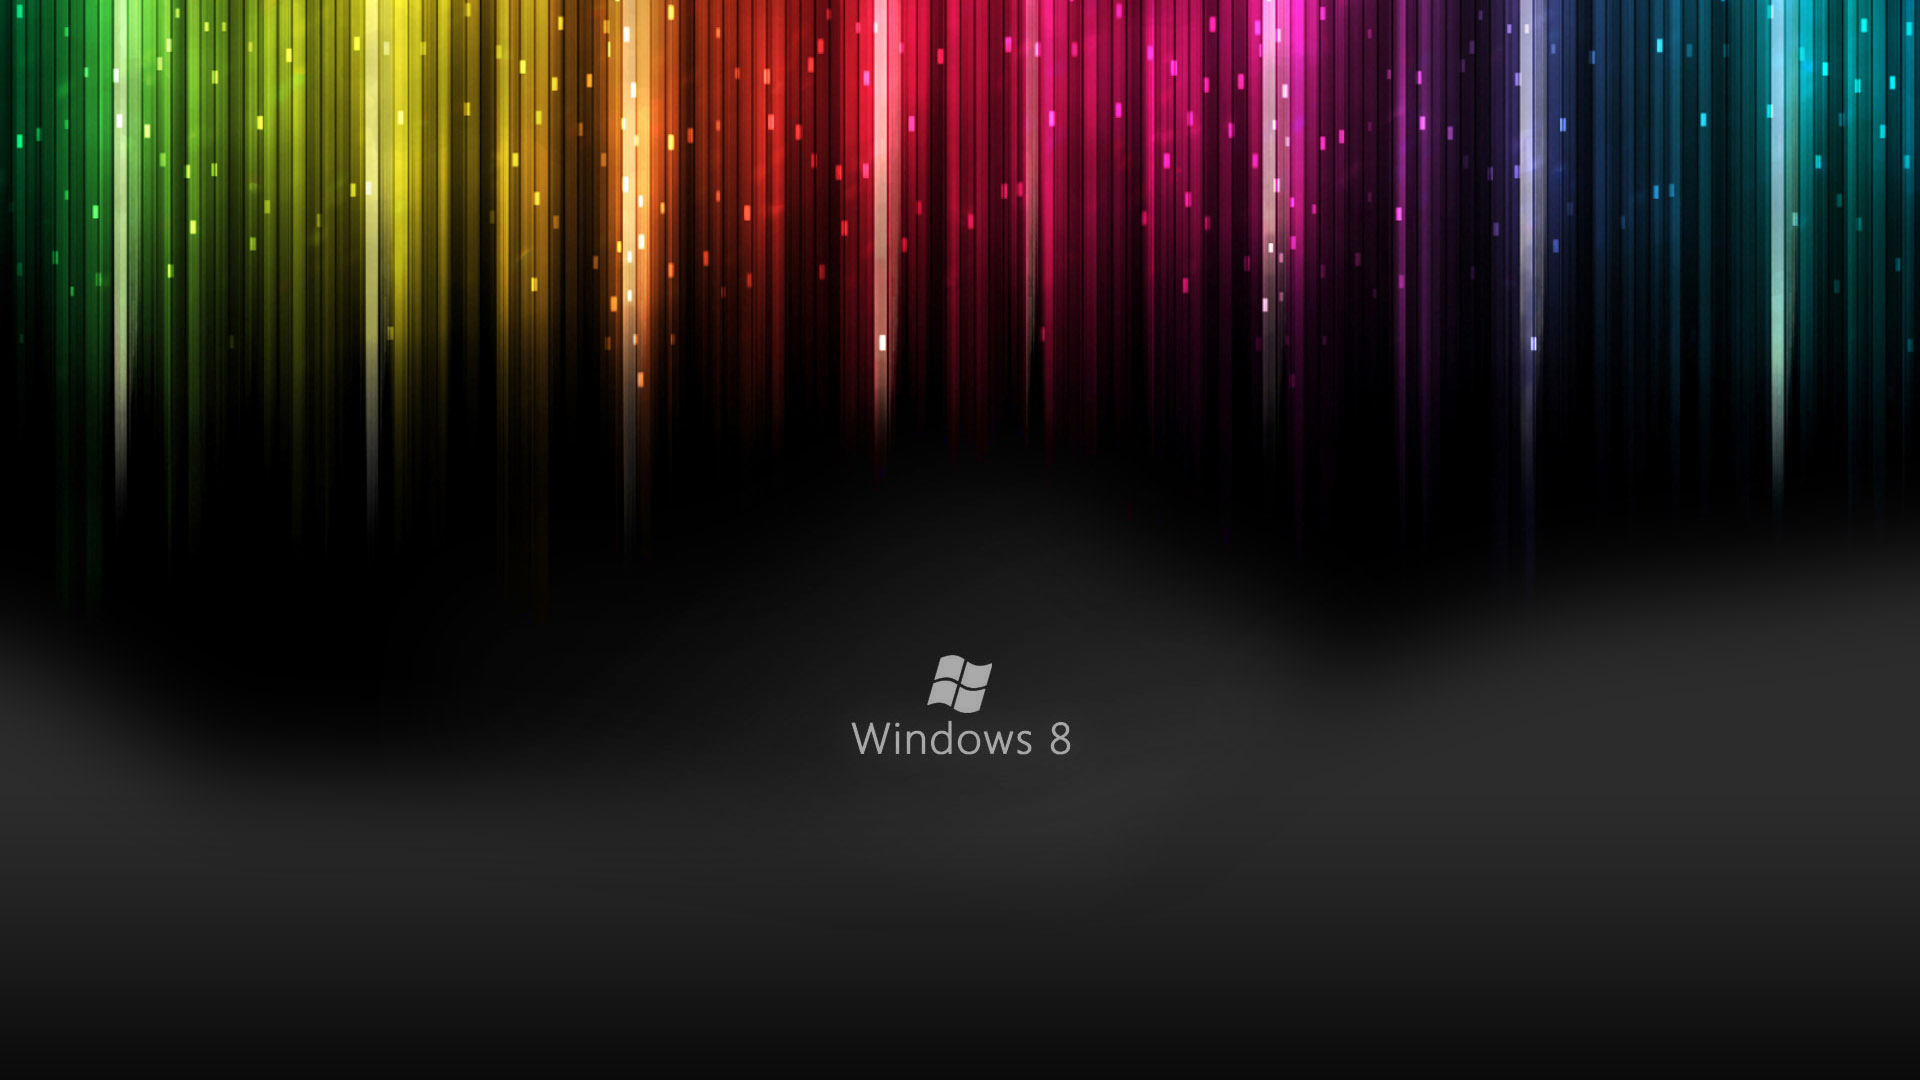 Windows 8 HD Wallpaper | Background Image | 1920x1080 Full Hd Wallpapers For Windows 8 1920x1080